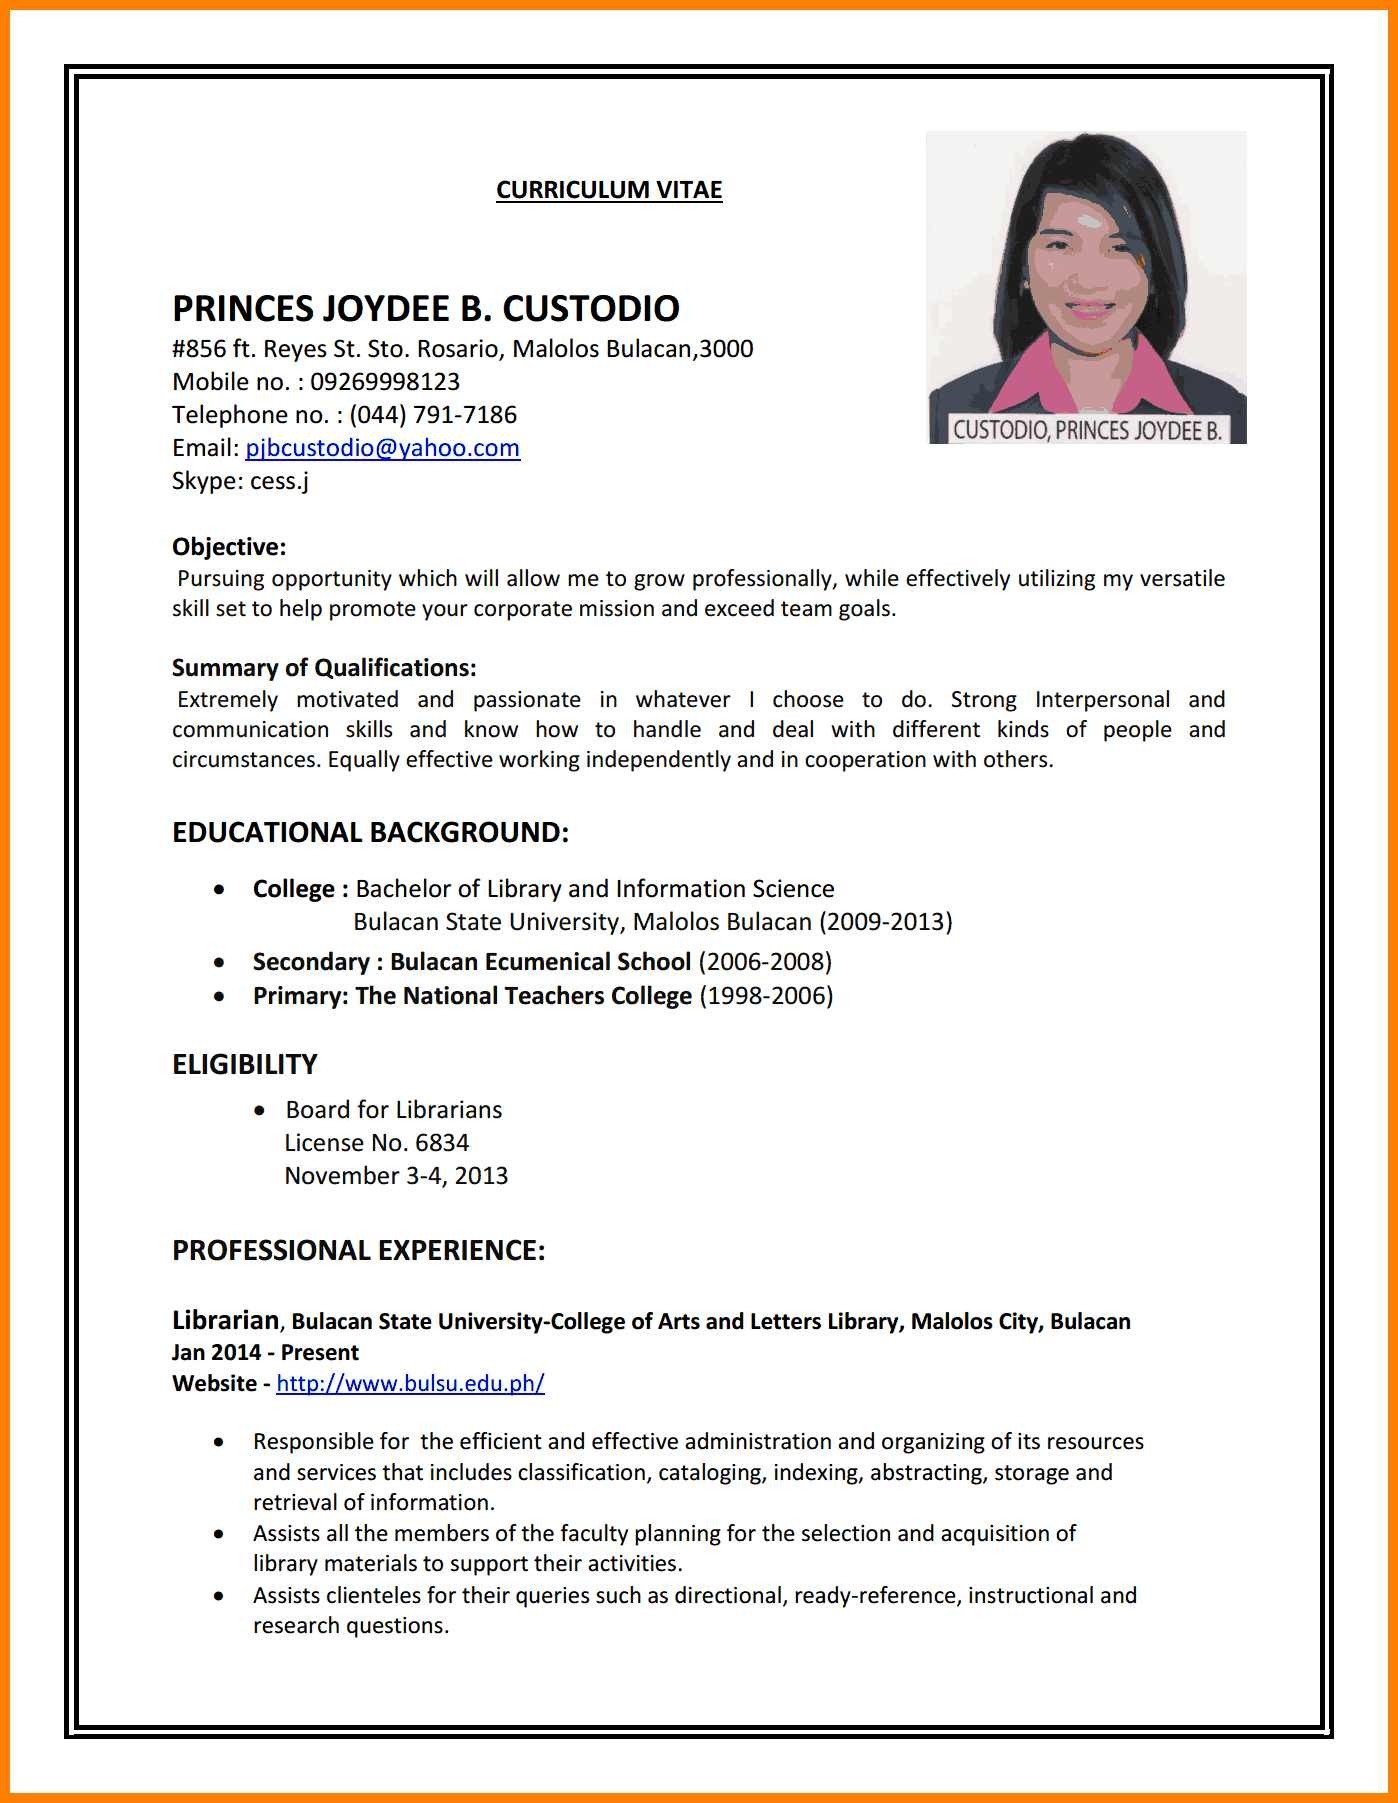 How To Do A Resume Cover Letter How To Make Resume For Job Application Free With No Experience Write Cv An At How Do I Do A Resume how to do a resume|wikiresume.com